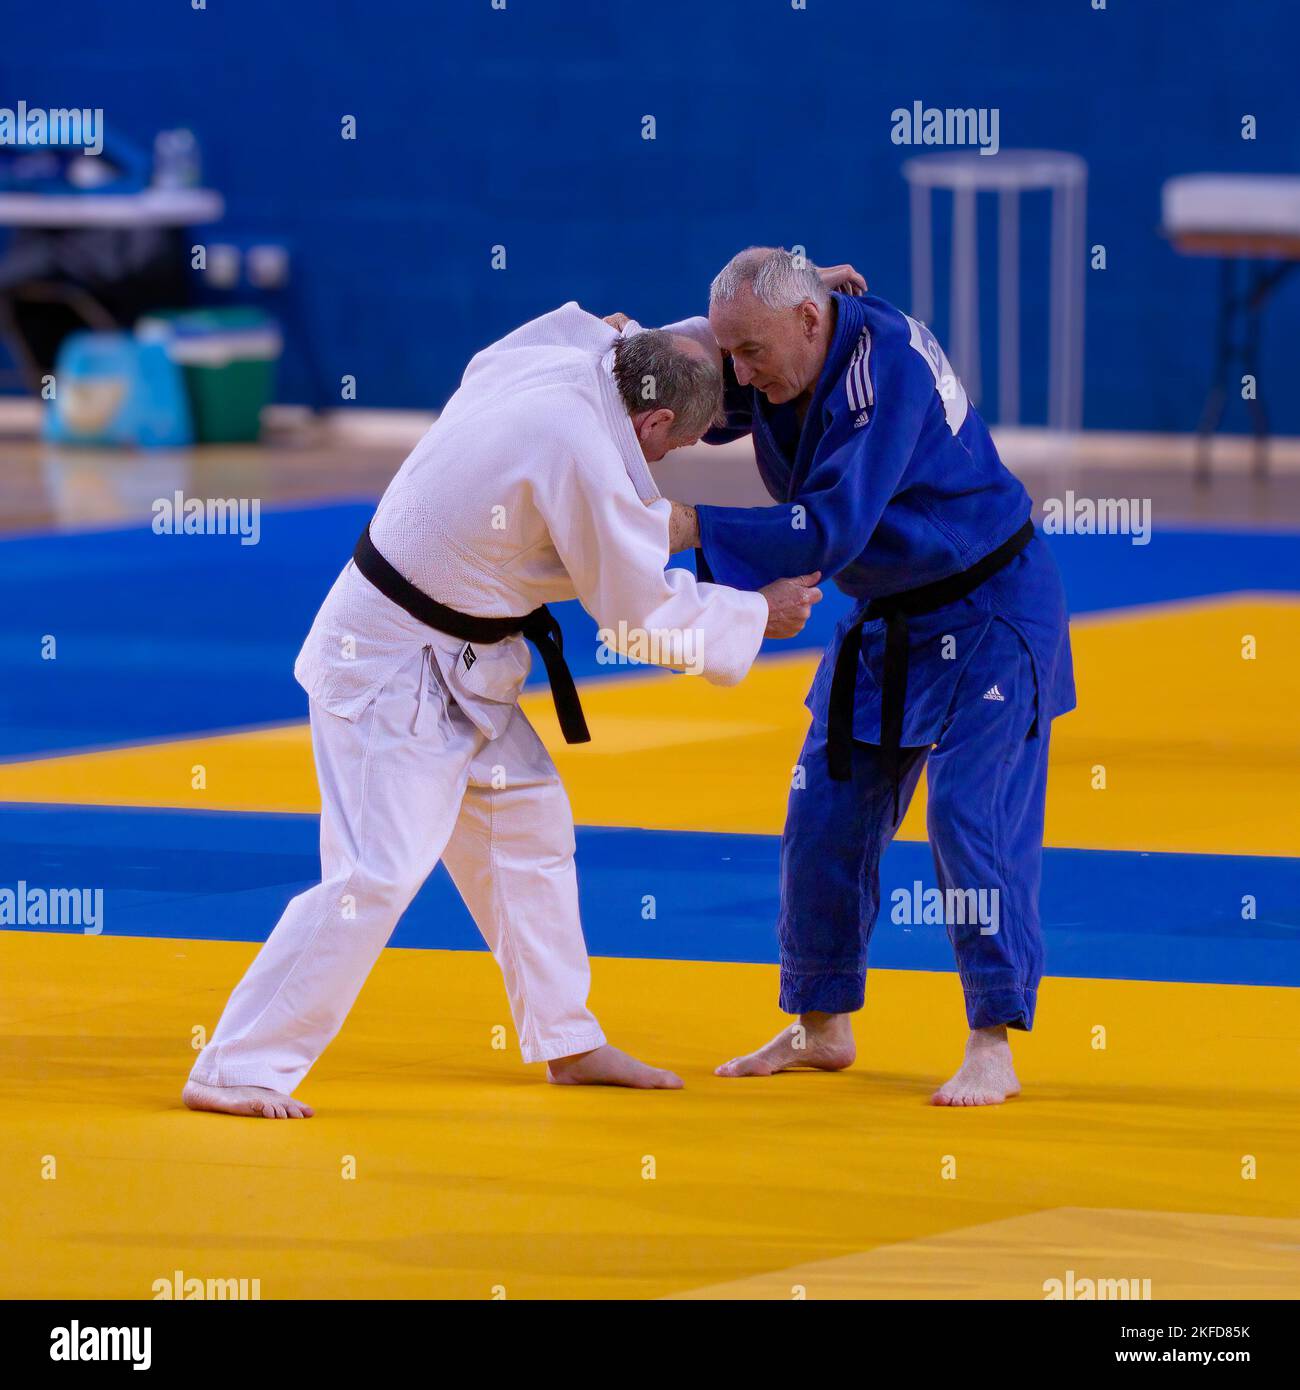 A Judo Competition IJF with fighters at arena Stock Photo